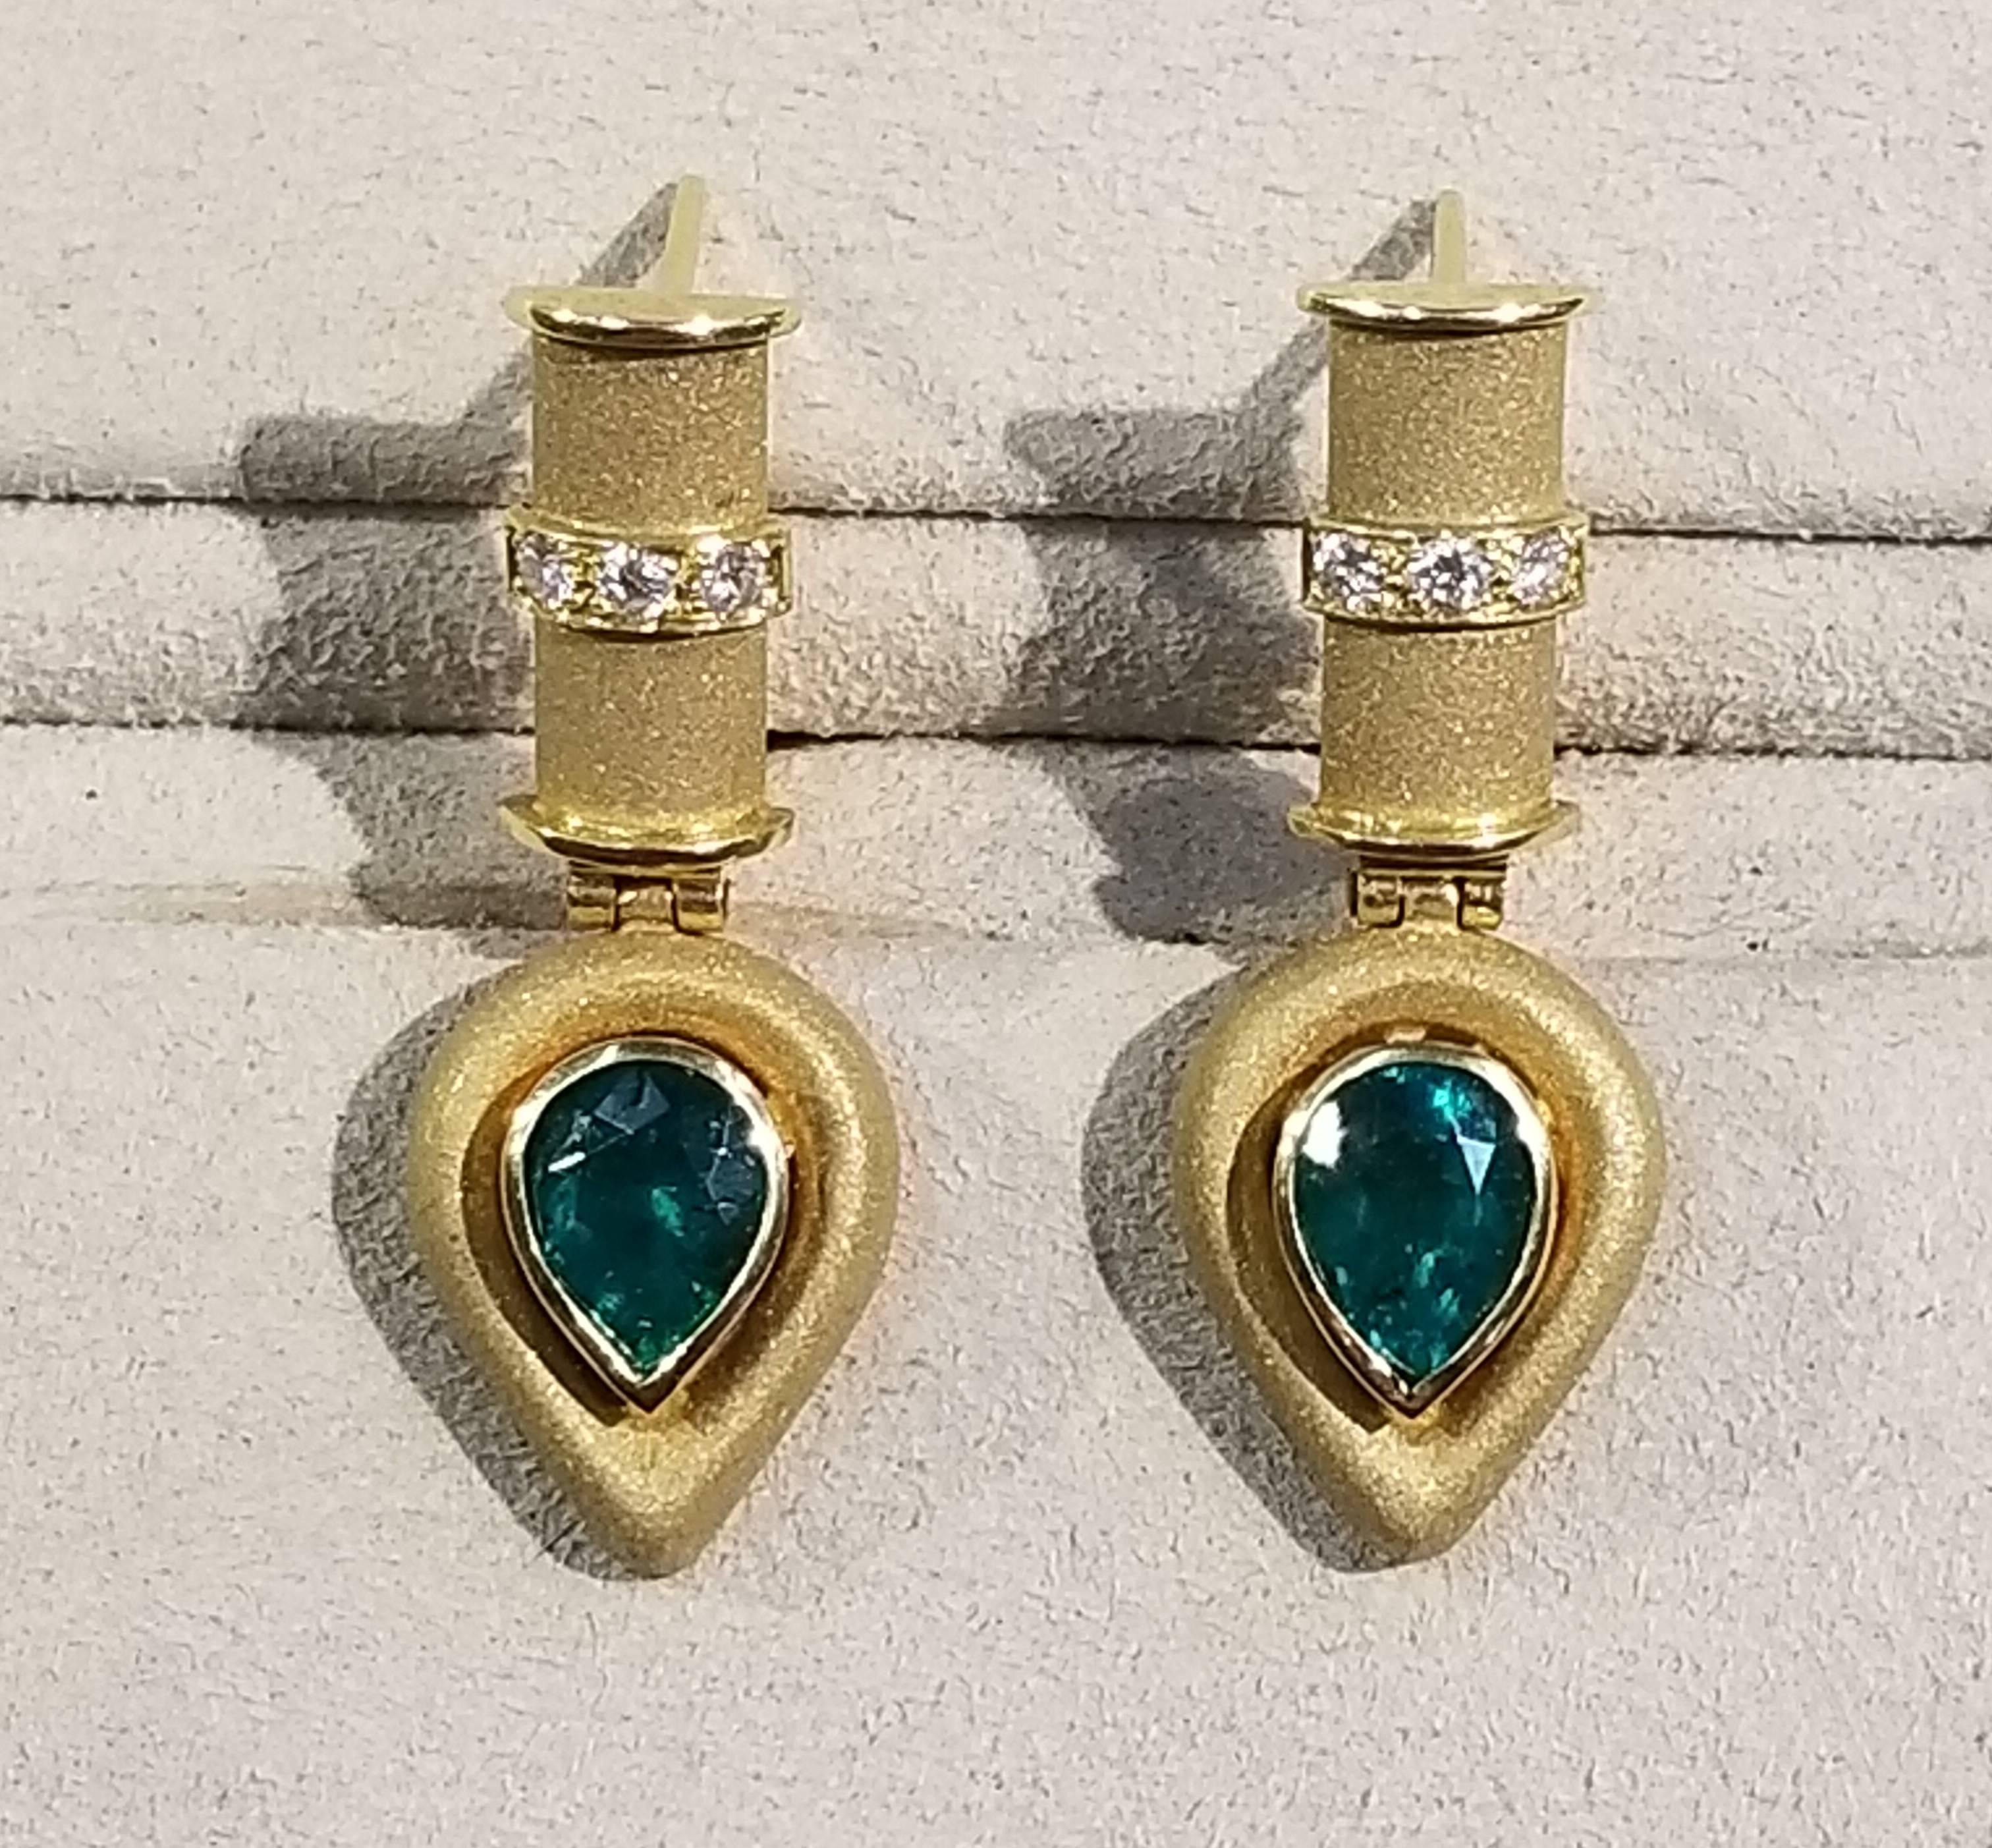 18 Karat Yellow Gold Emerald Earrings In Excellent Condition For Sale In Santa Fe, NM